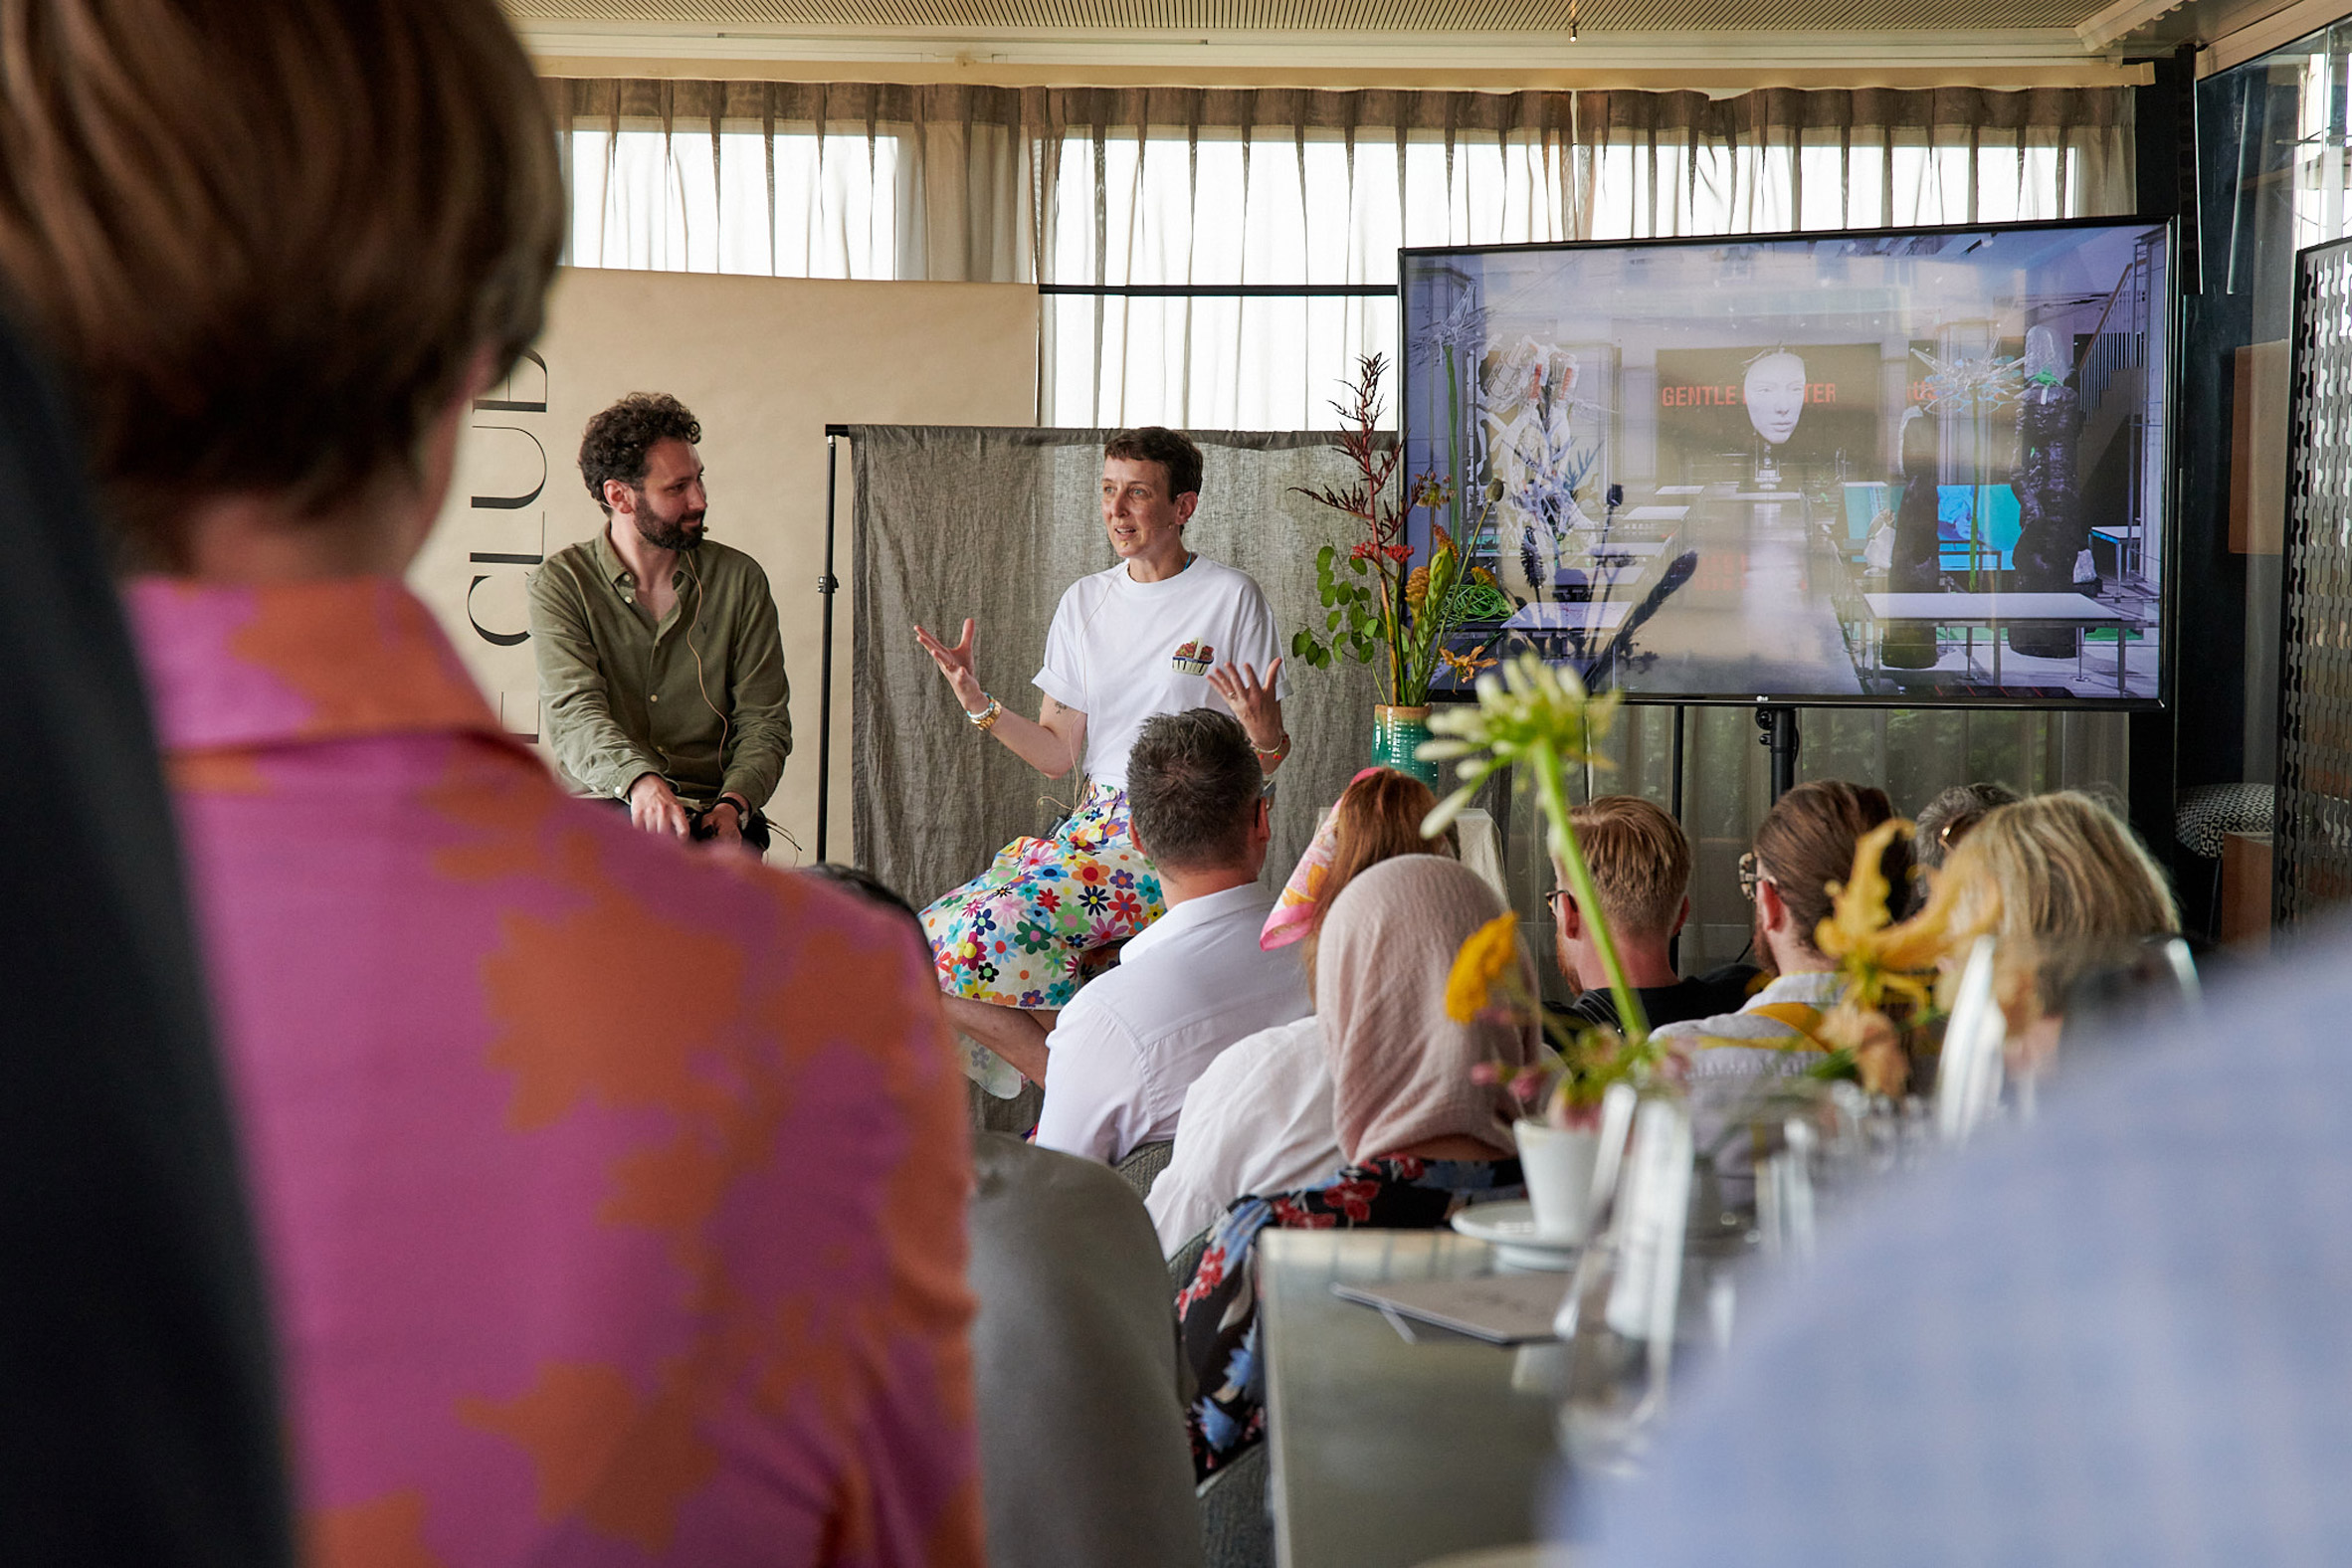 Liganova Salone Club with Sarah Andelman and Ben Hobson in conversation in front of an audience